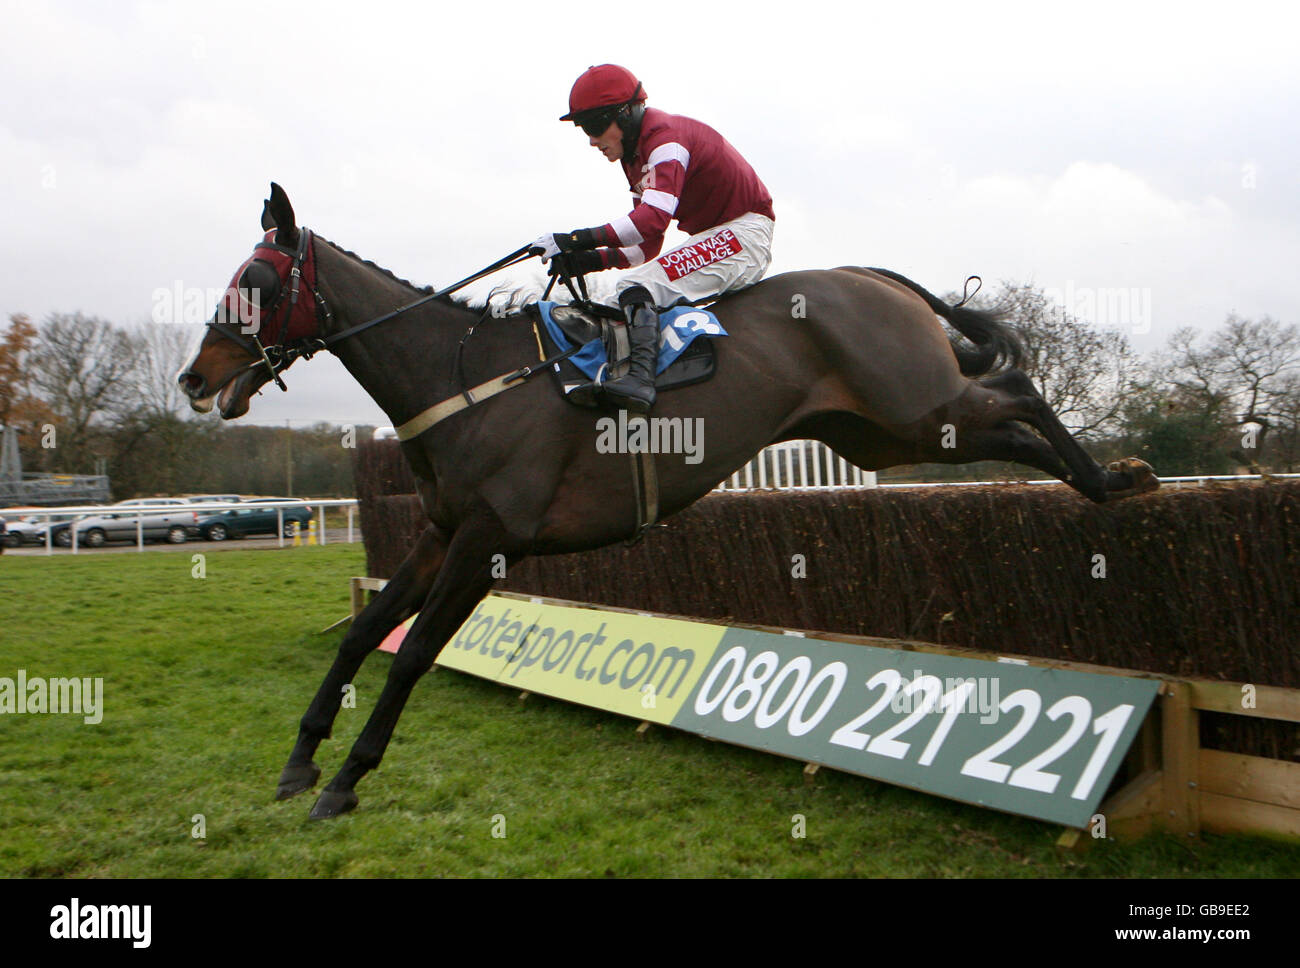 Horse Racing - Wetherby Racecourse Foto Stock